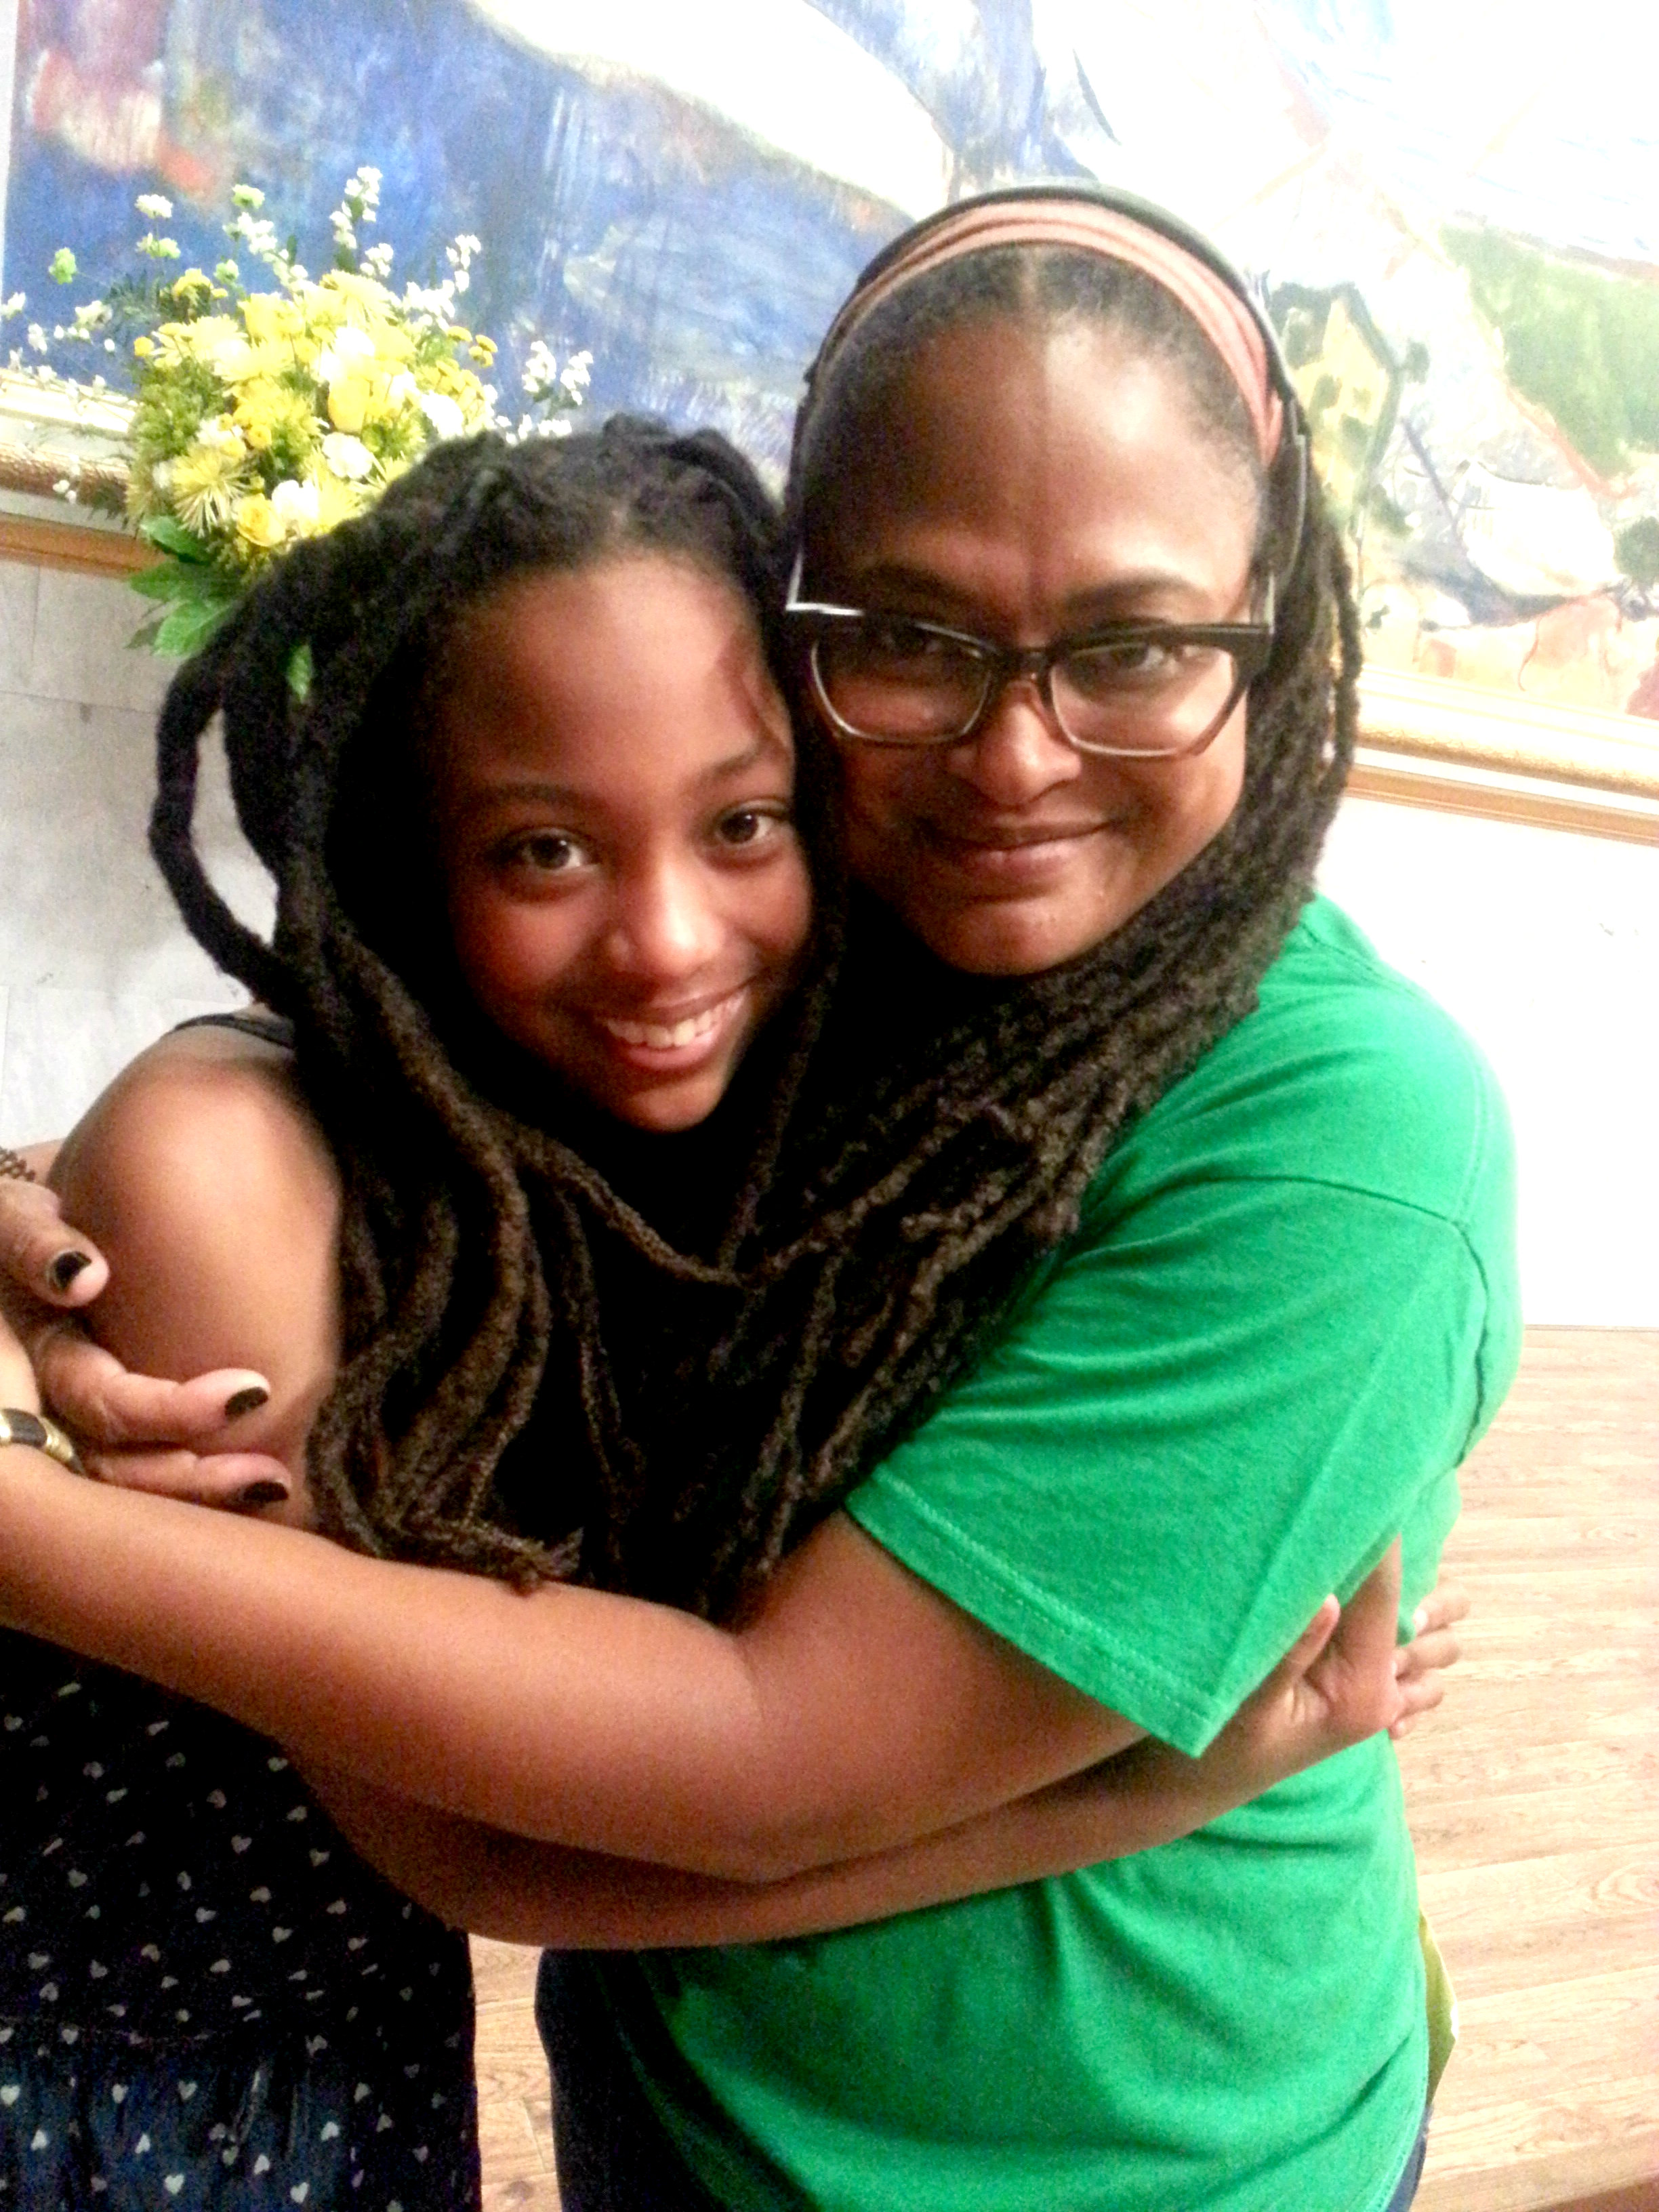 Trinity and Ava DuVernay (Director) on the set of 